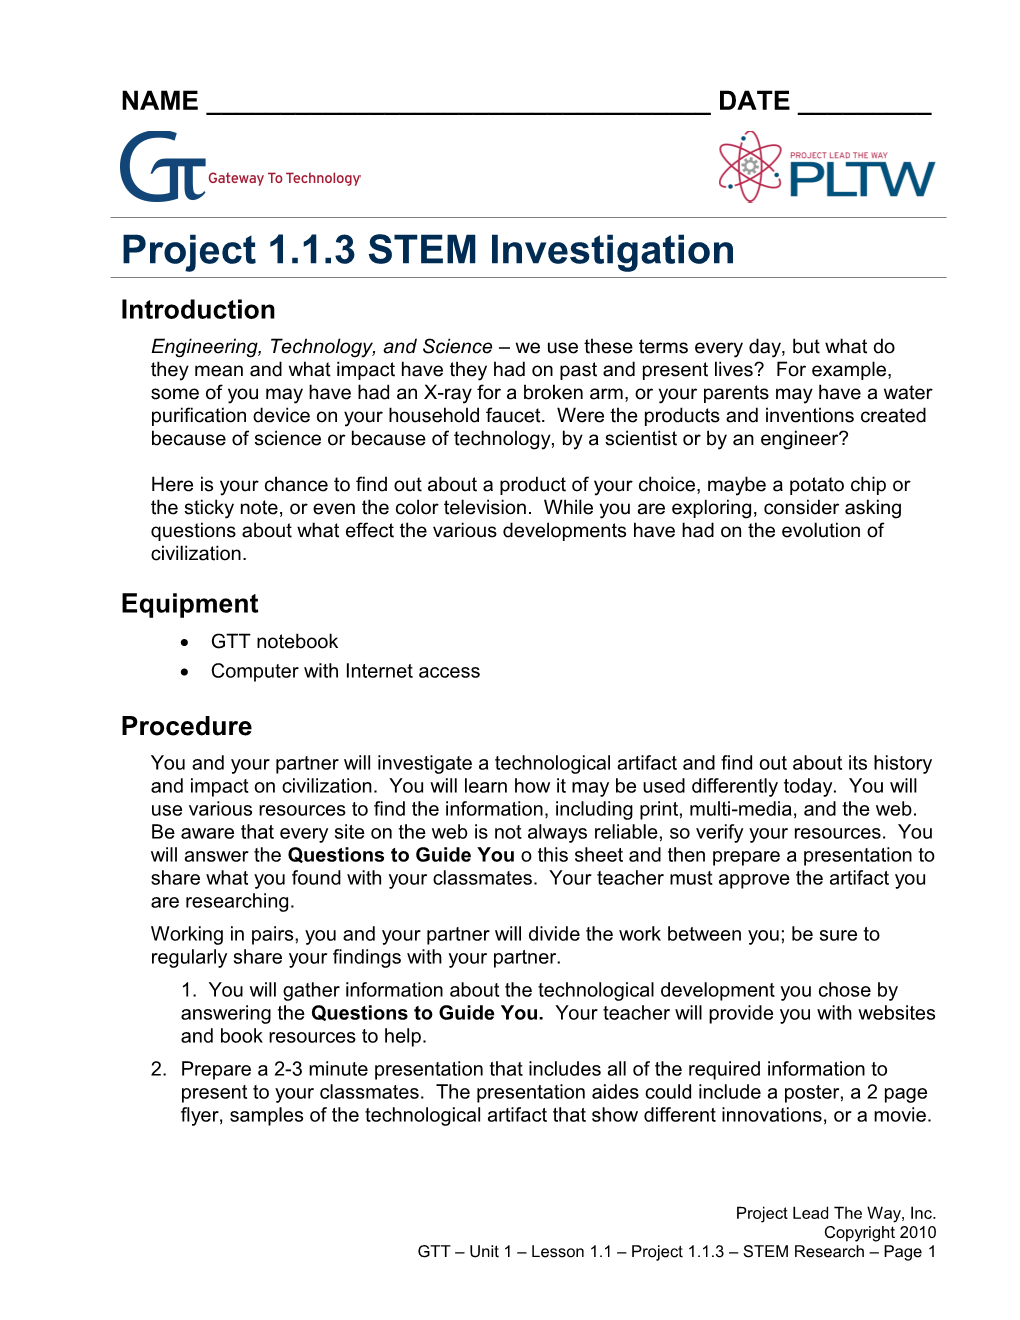 Project 1.1.3 STEM Research